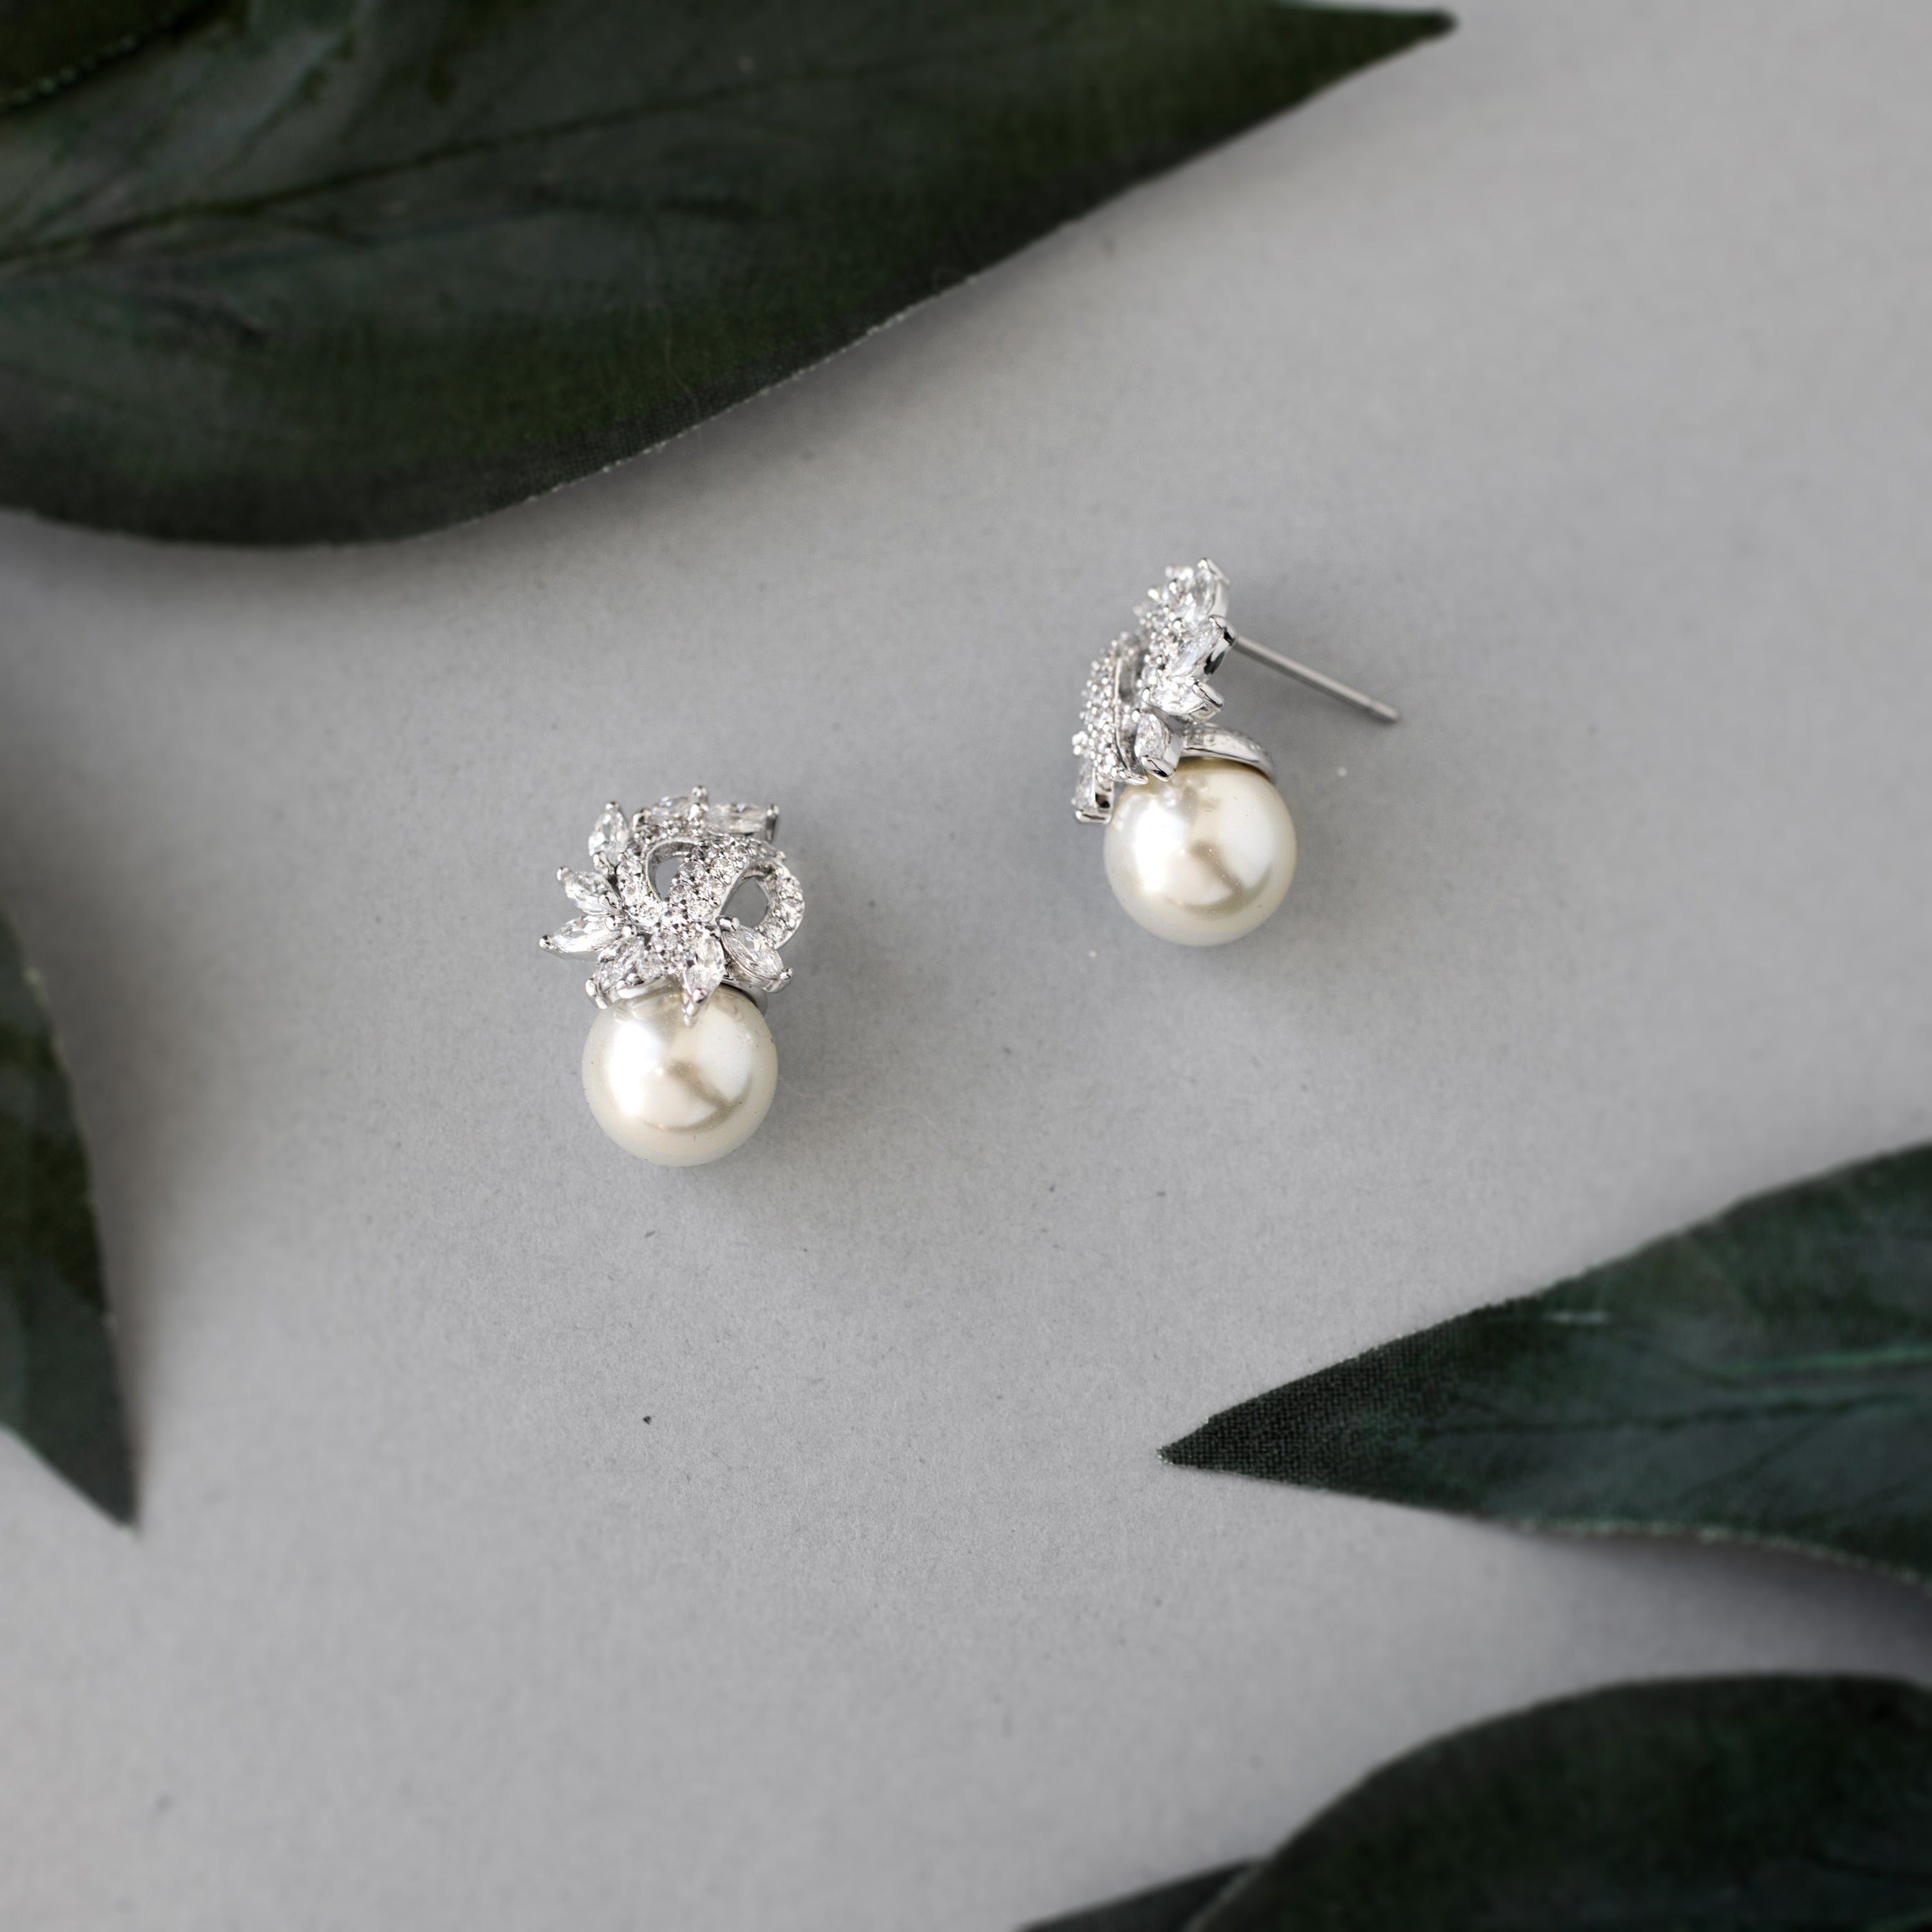 14K White Gold Earrings with Pearls and Brilliants | KLENOTA